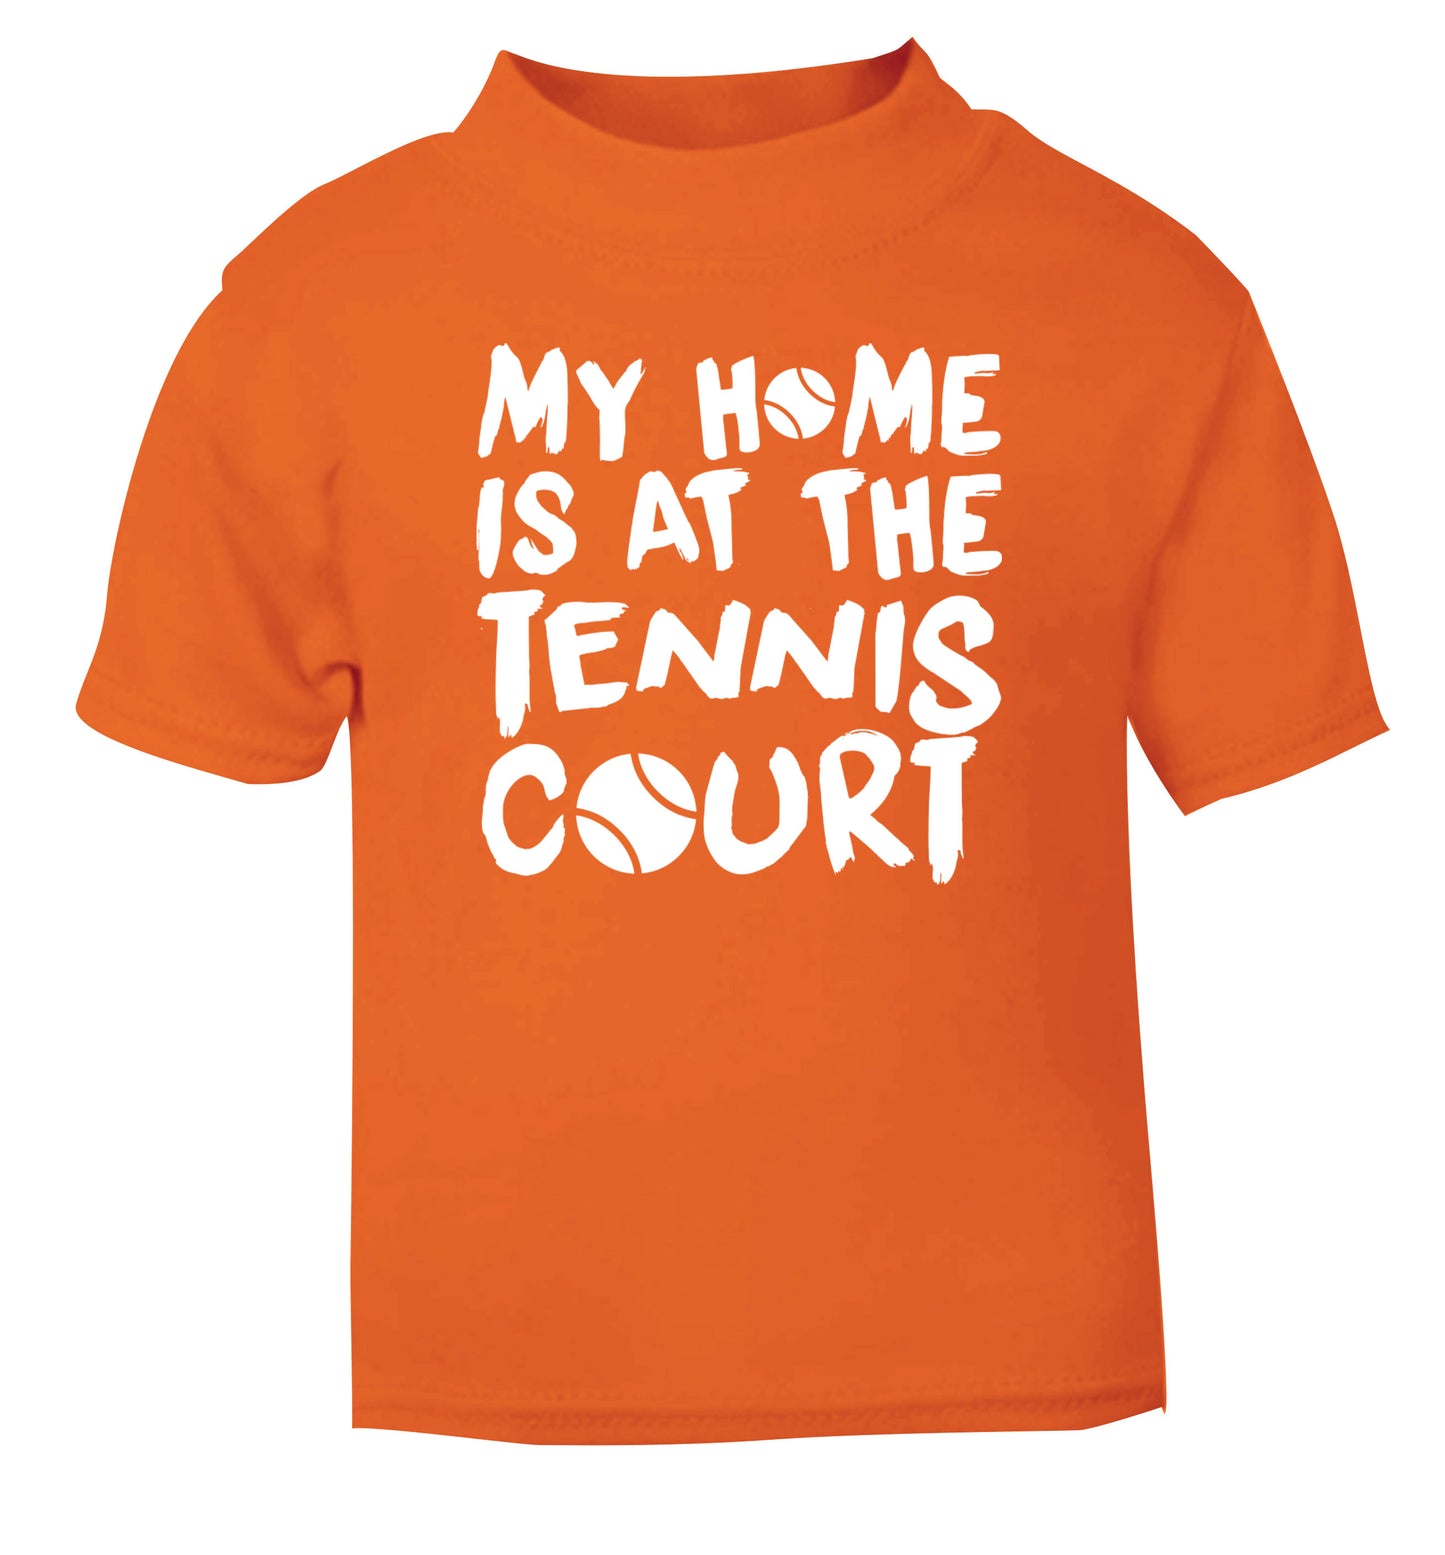 My home is at the tennis court orange Baby Toddler Tshirt 2 Years